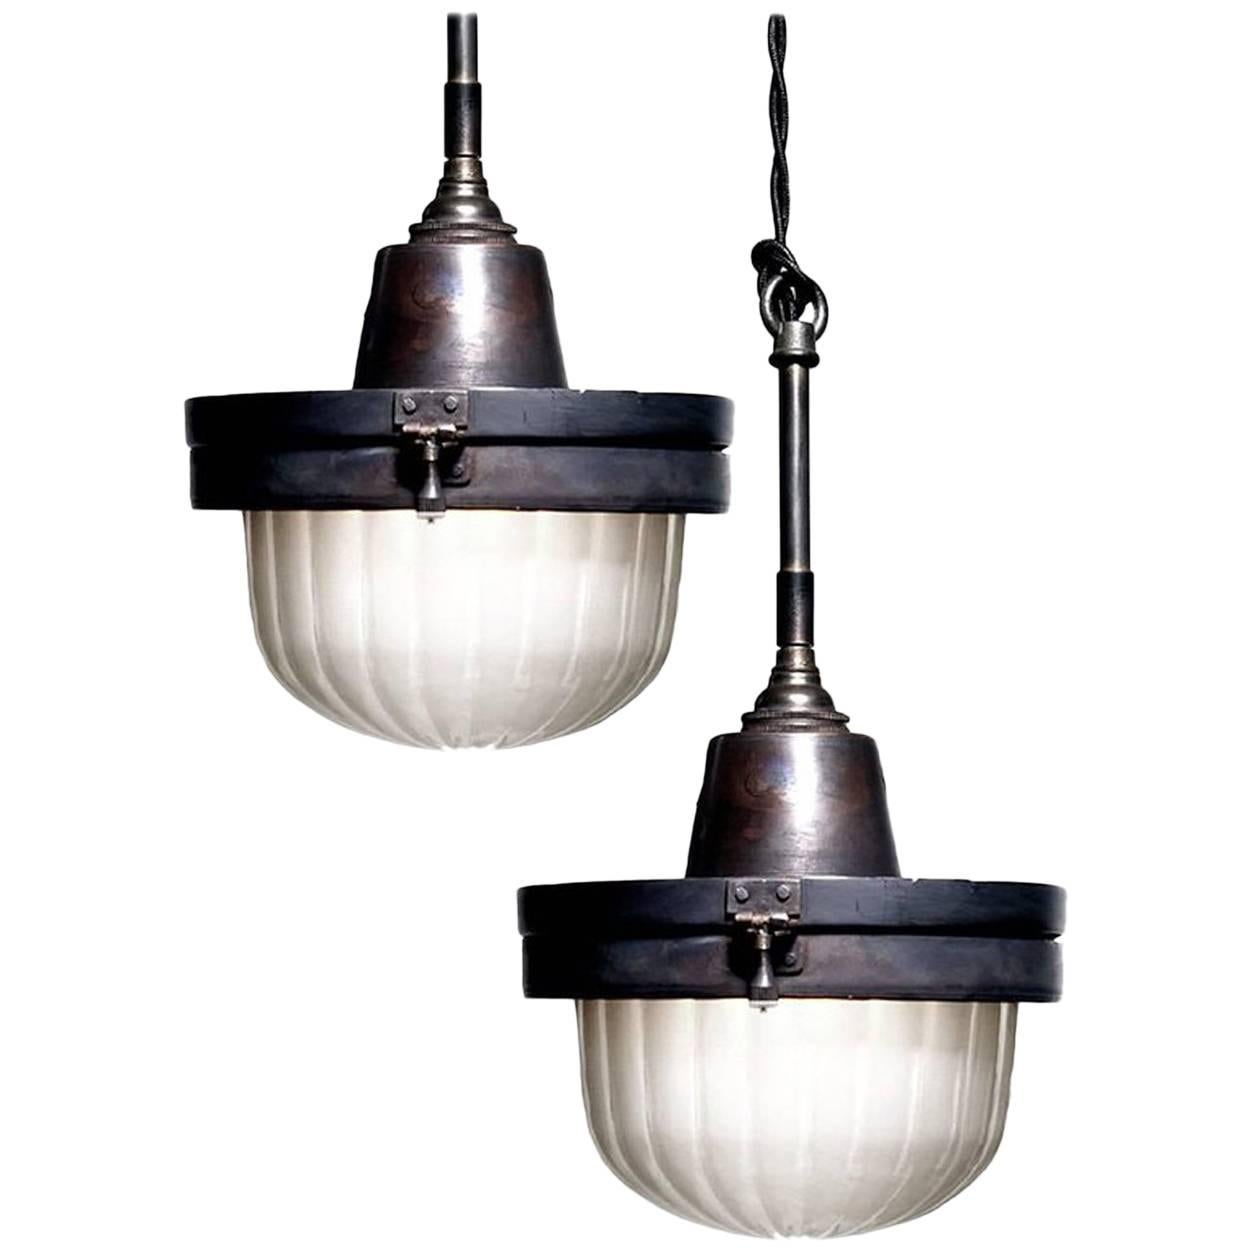 This is an interesting and very unique looking lamp. The fixture itself has a hinged copper body with locking hardware. The glass is a nice frosted and ribbed glass dome. Our design inspiration came from early railroad car ceiling flushmounts. I